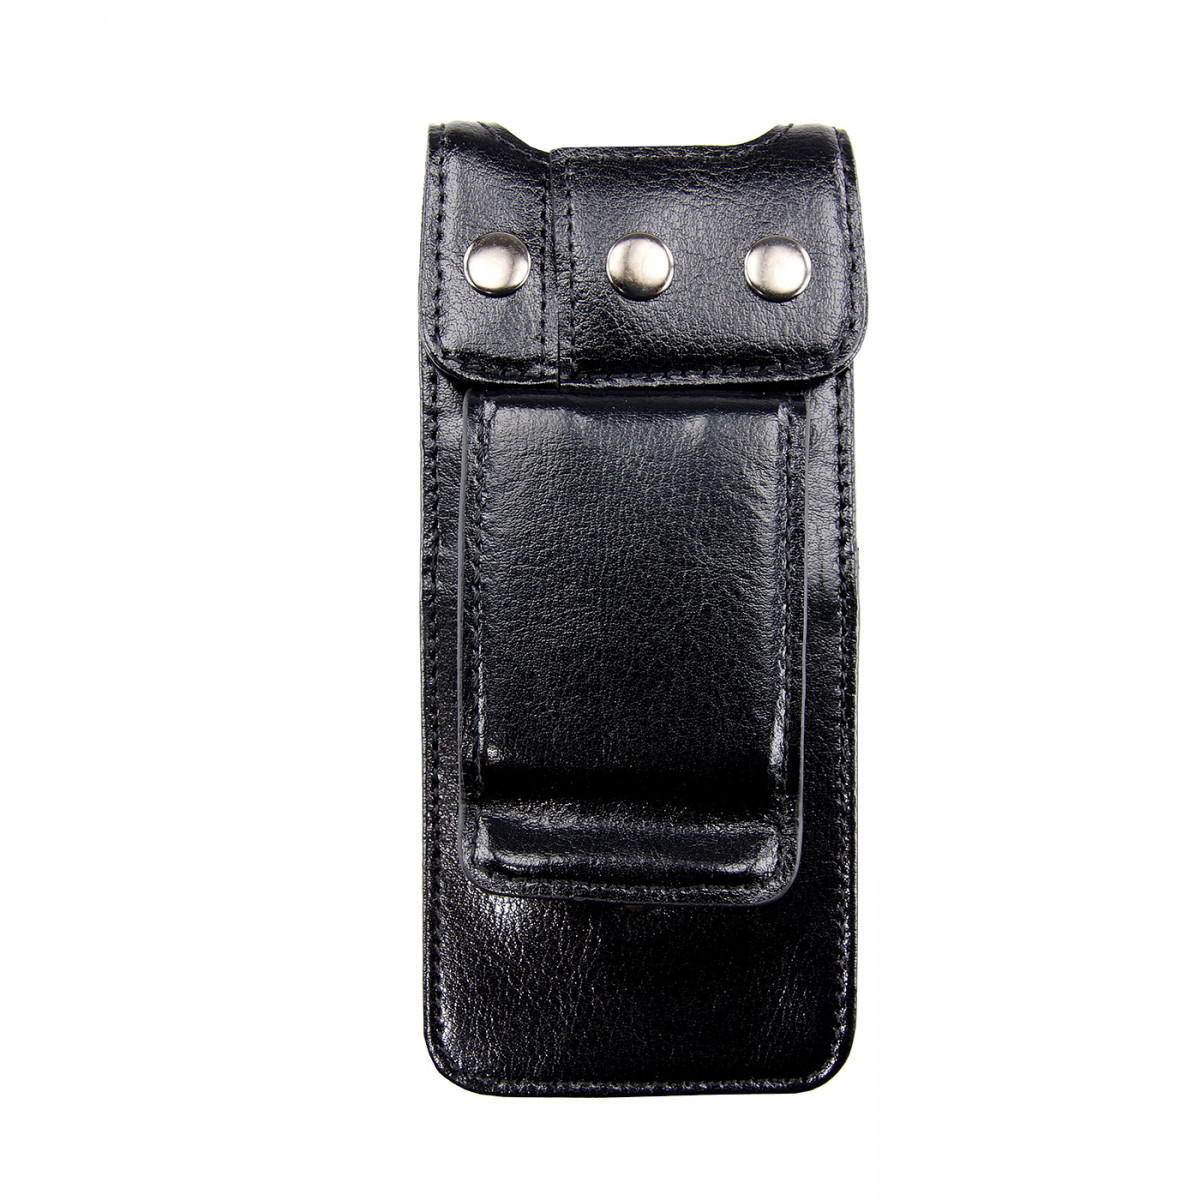 SEPURA leather pouch with belt clip 50mm for STP8/9000 300-00440